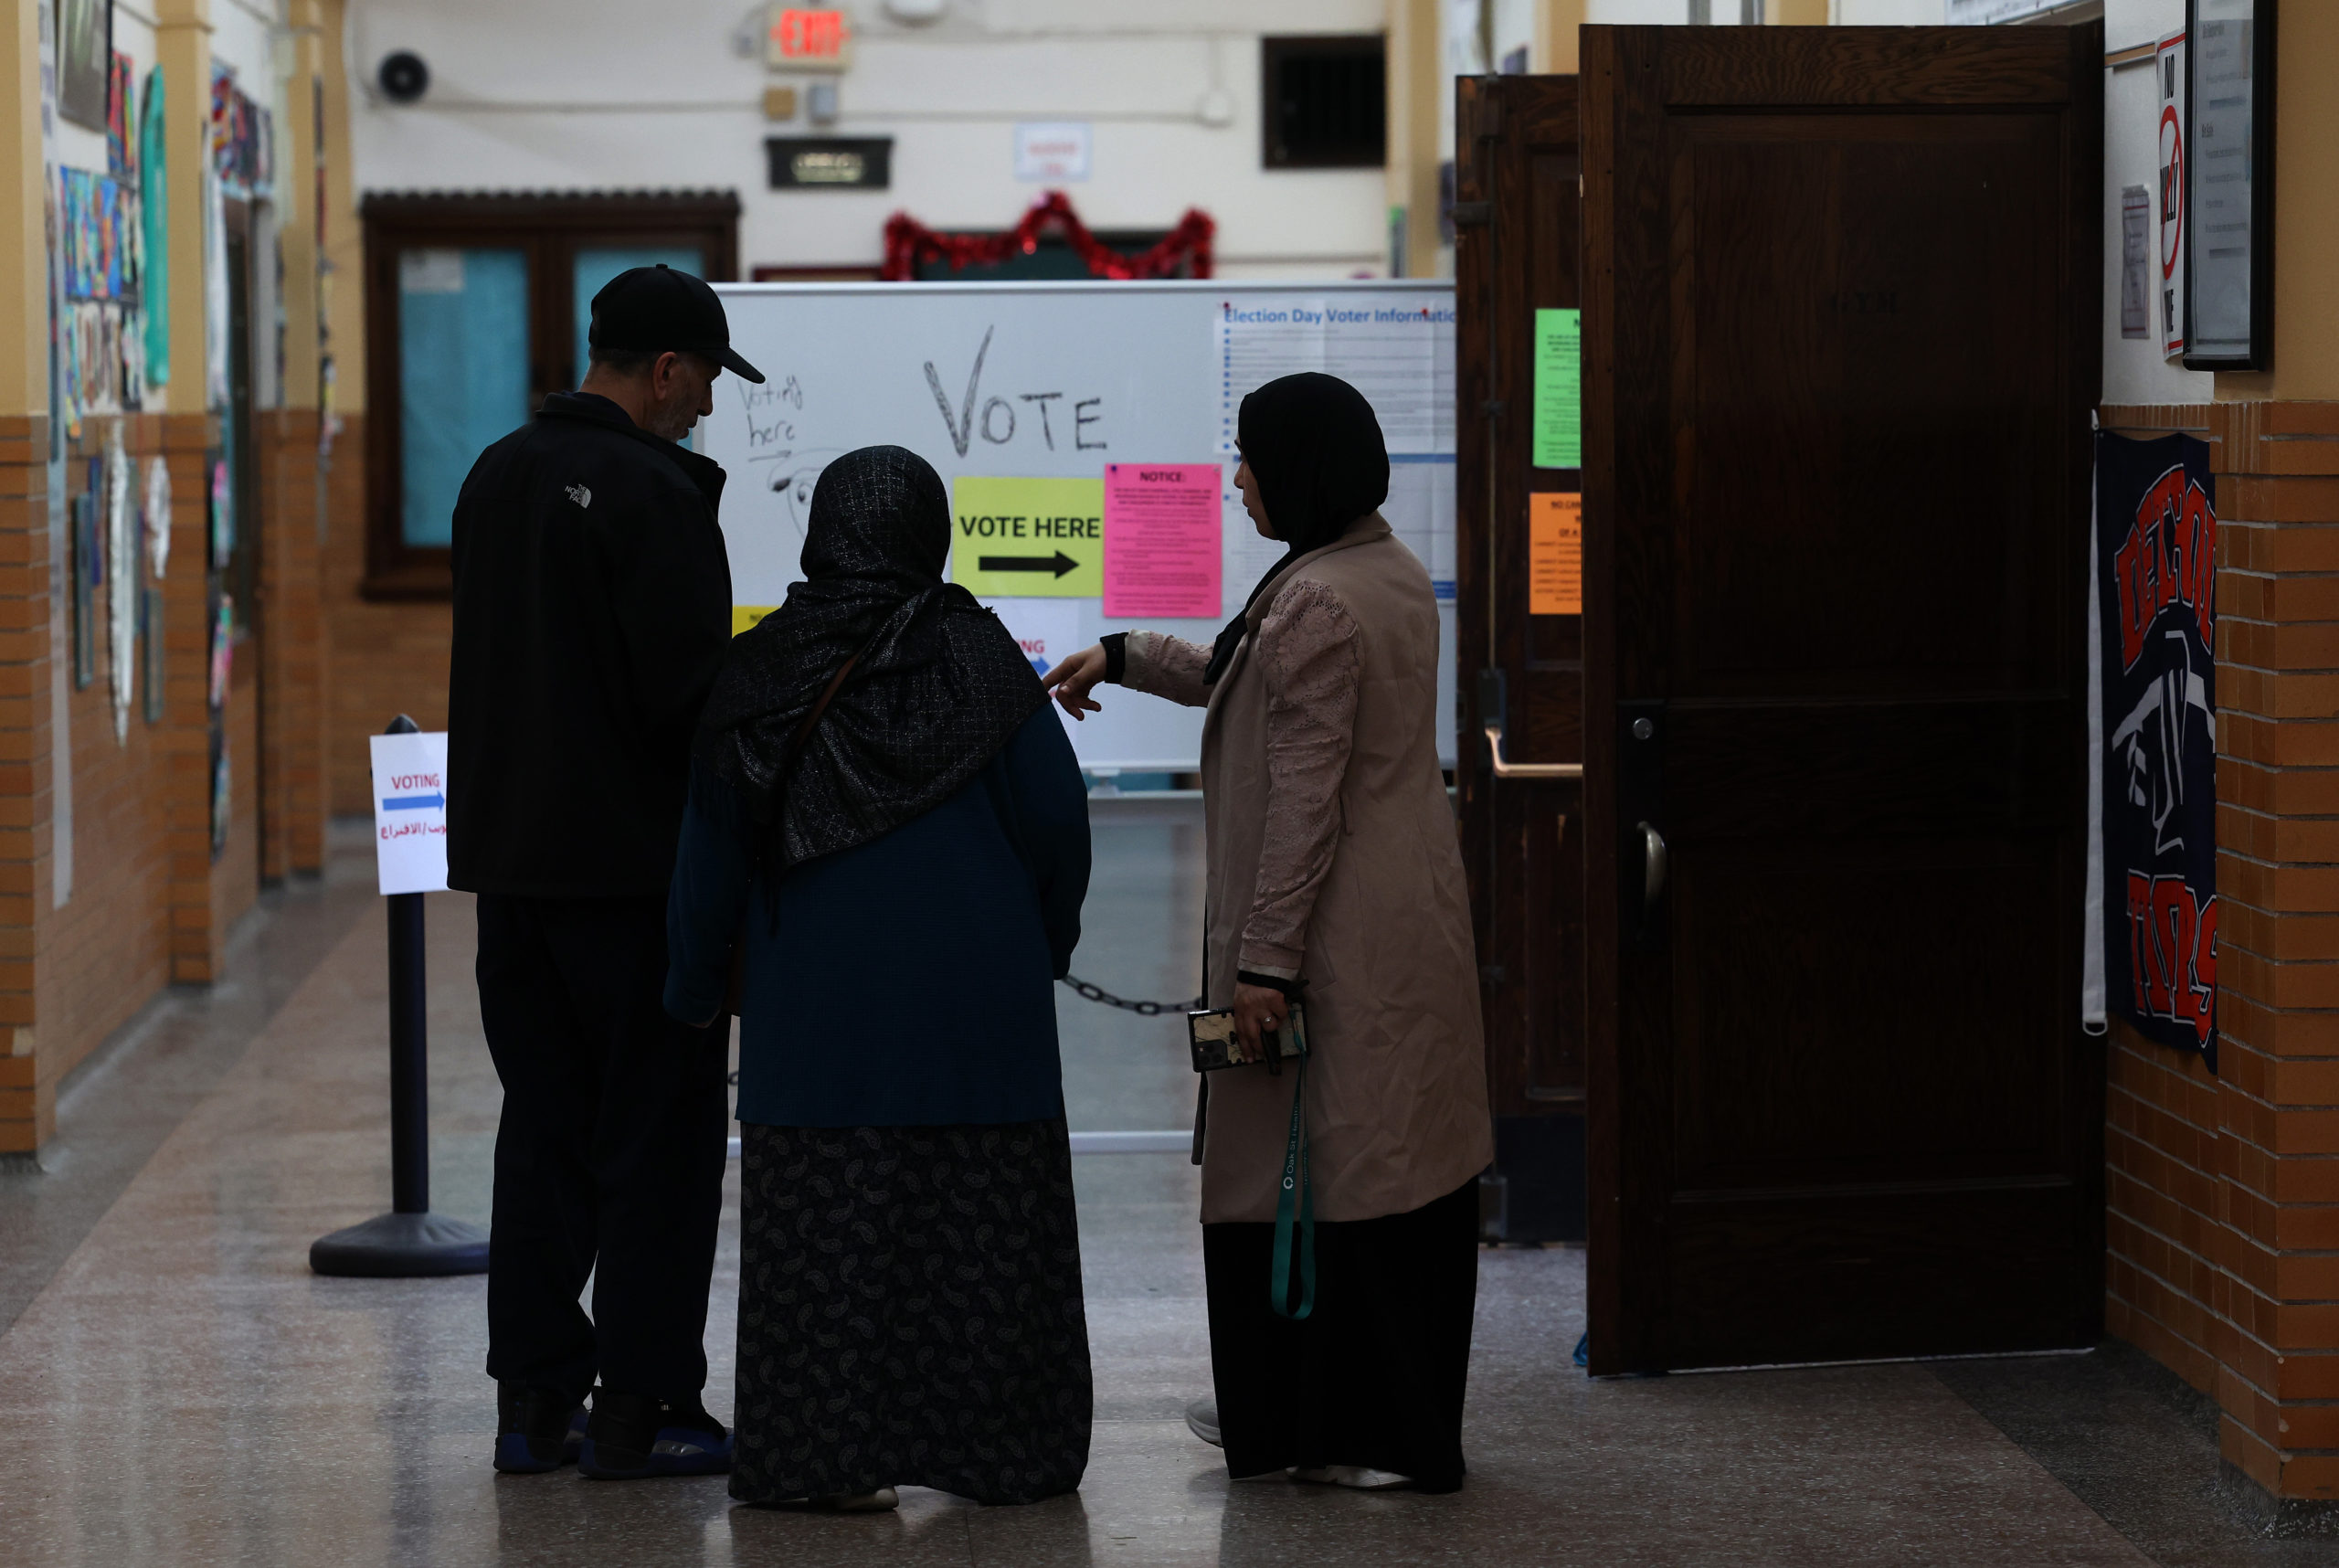 Voters arrive to cast their ballots in the Michigan primary election at McDonald Elementary School on February 27, 2024 in Dearborn, Michigan. The Michigan Democratic and Republican parties held their primary elections today. Republican presidential candidate, former U.N. ambassador Nikki Haley has vowed to stay in the race at least through Super Tuesday on March 5. (Photo by Kevin Dietsch/Getty Images)